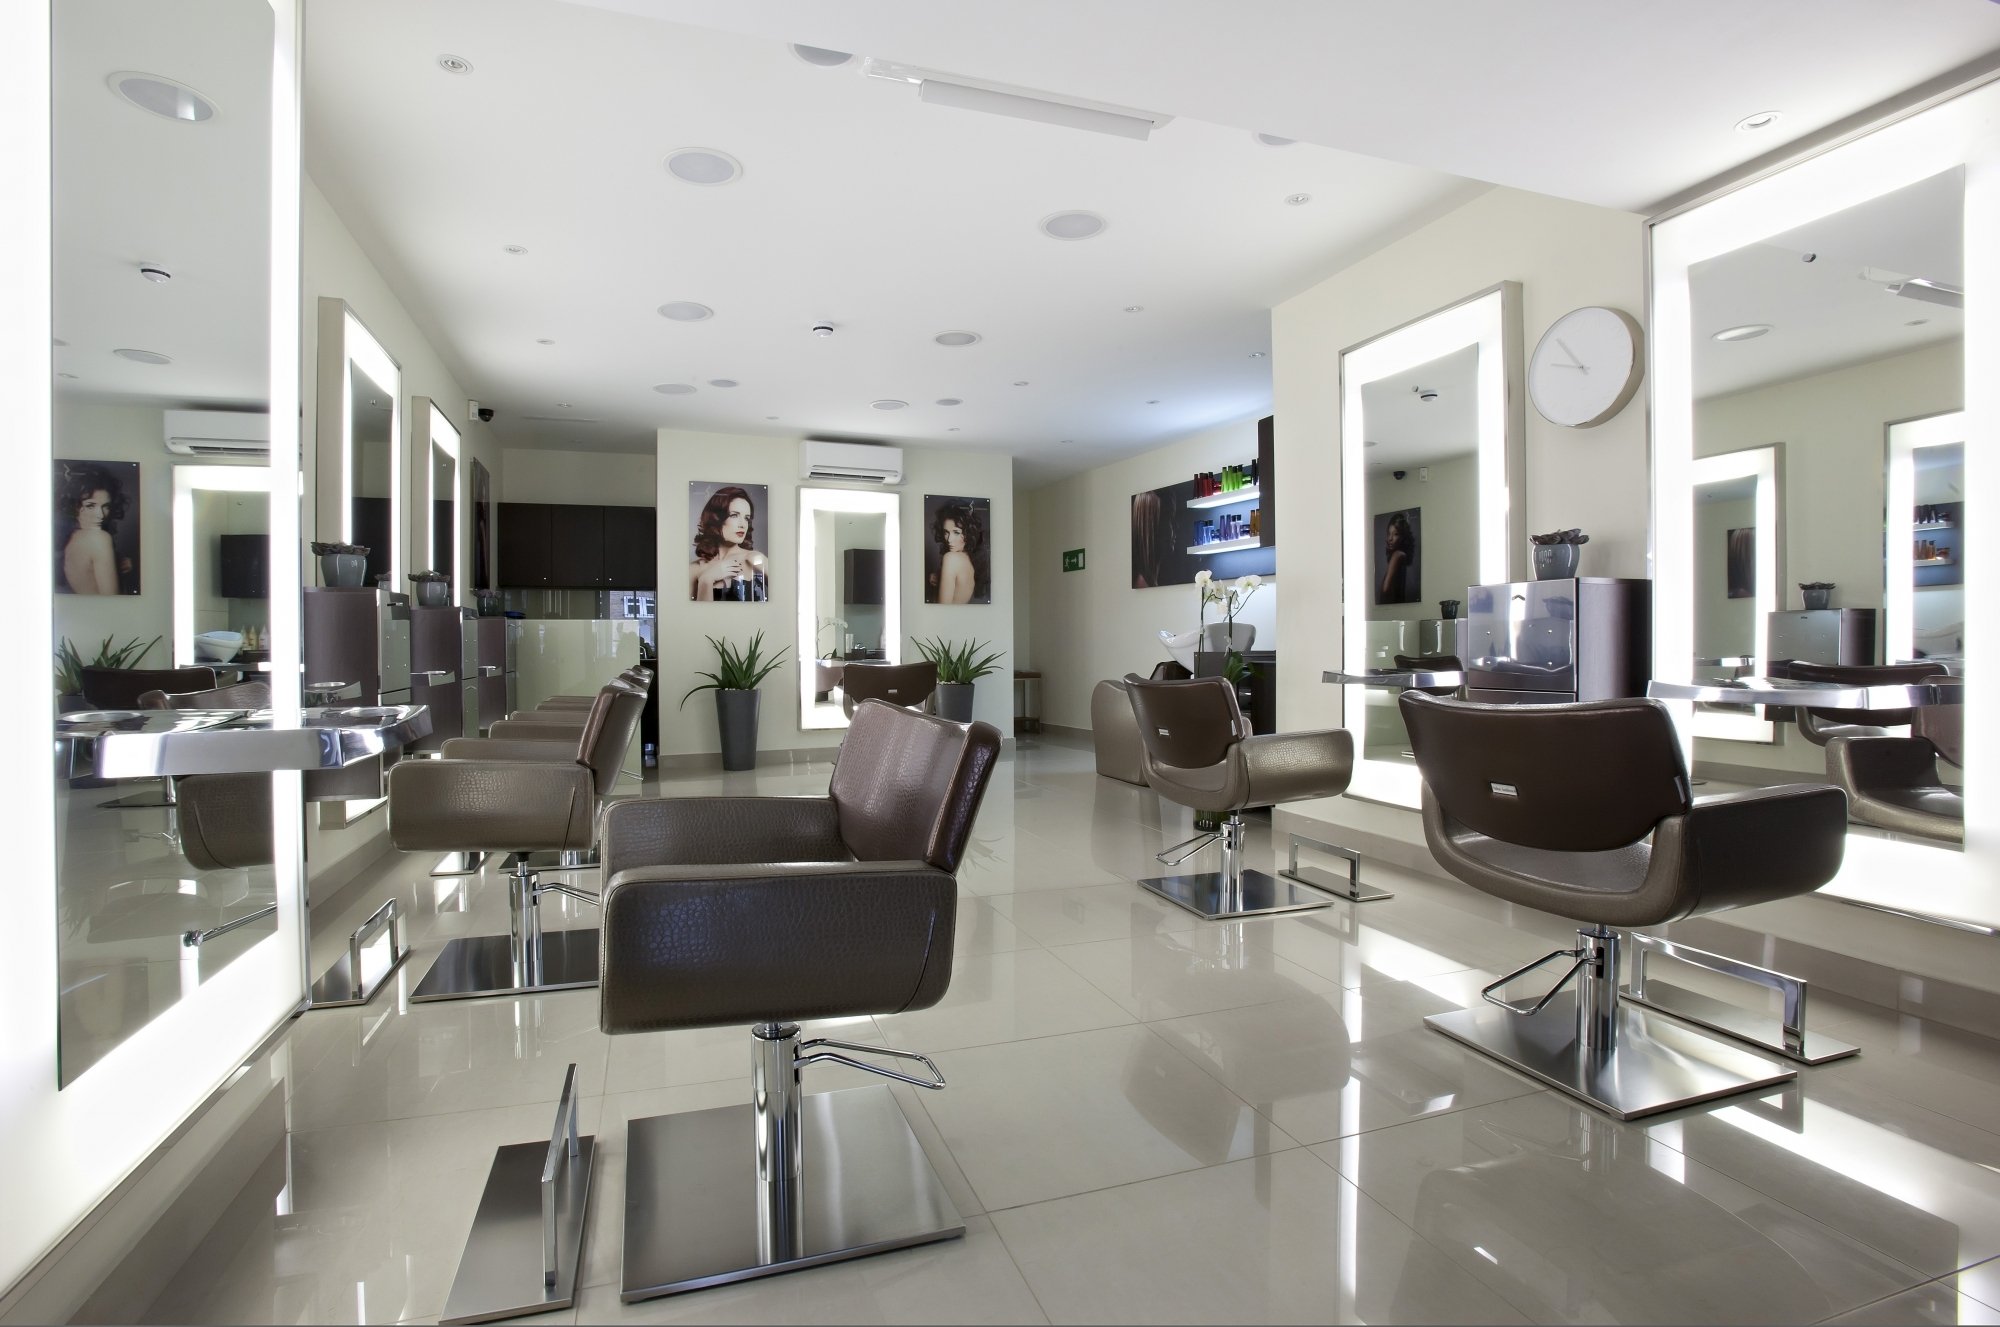 Small salon layout for multiple stylists